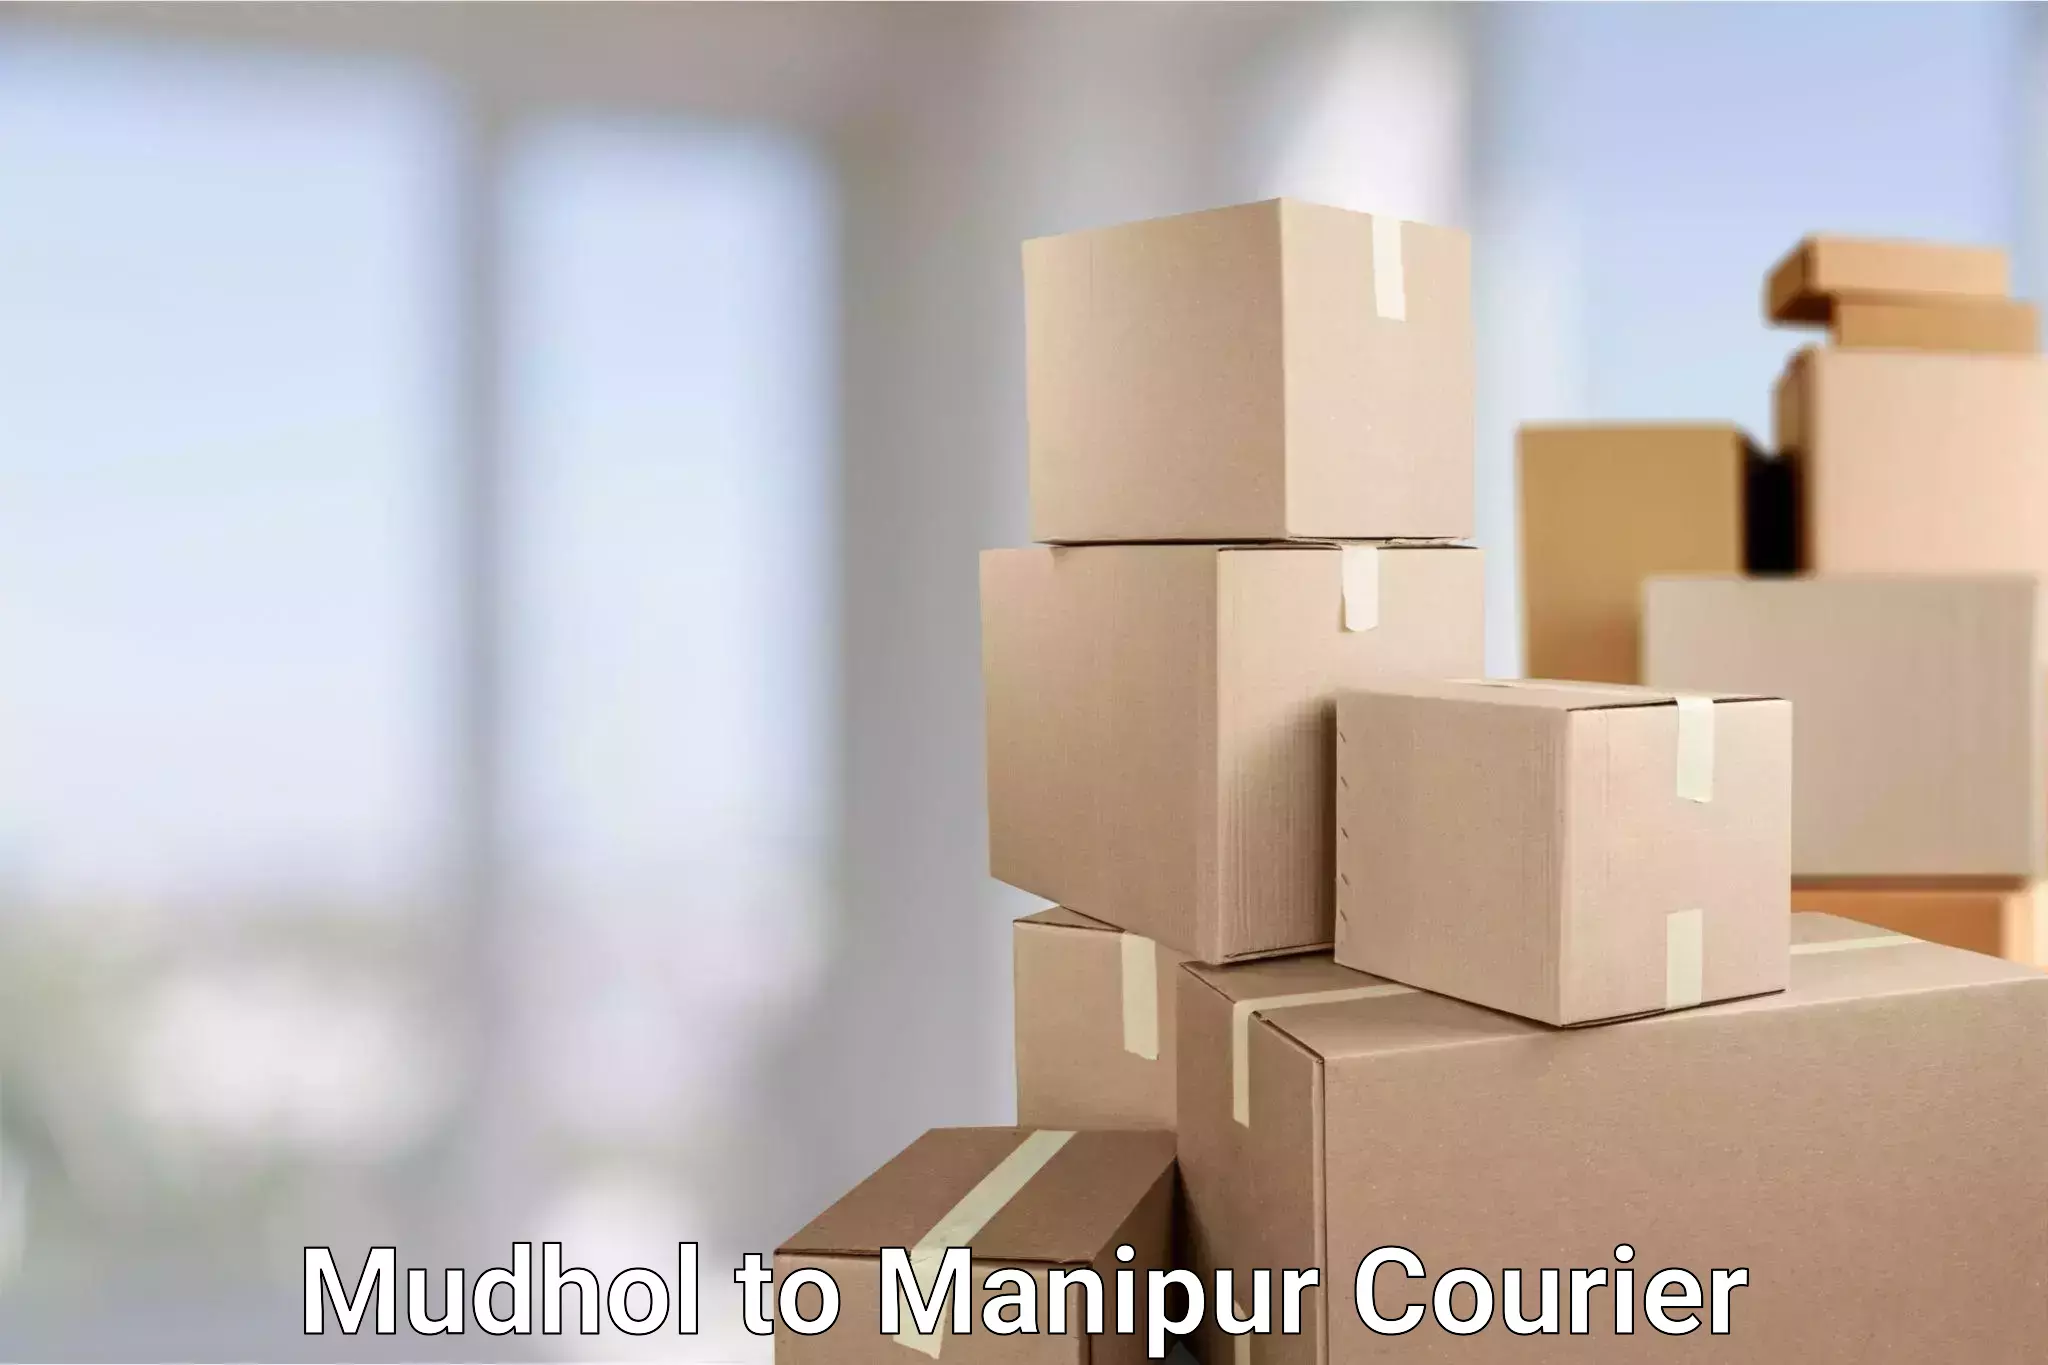 Courier service comparison Mudhol to Manipur